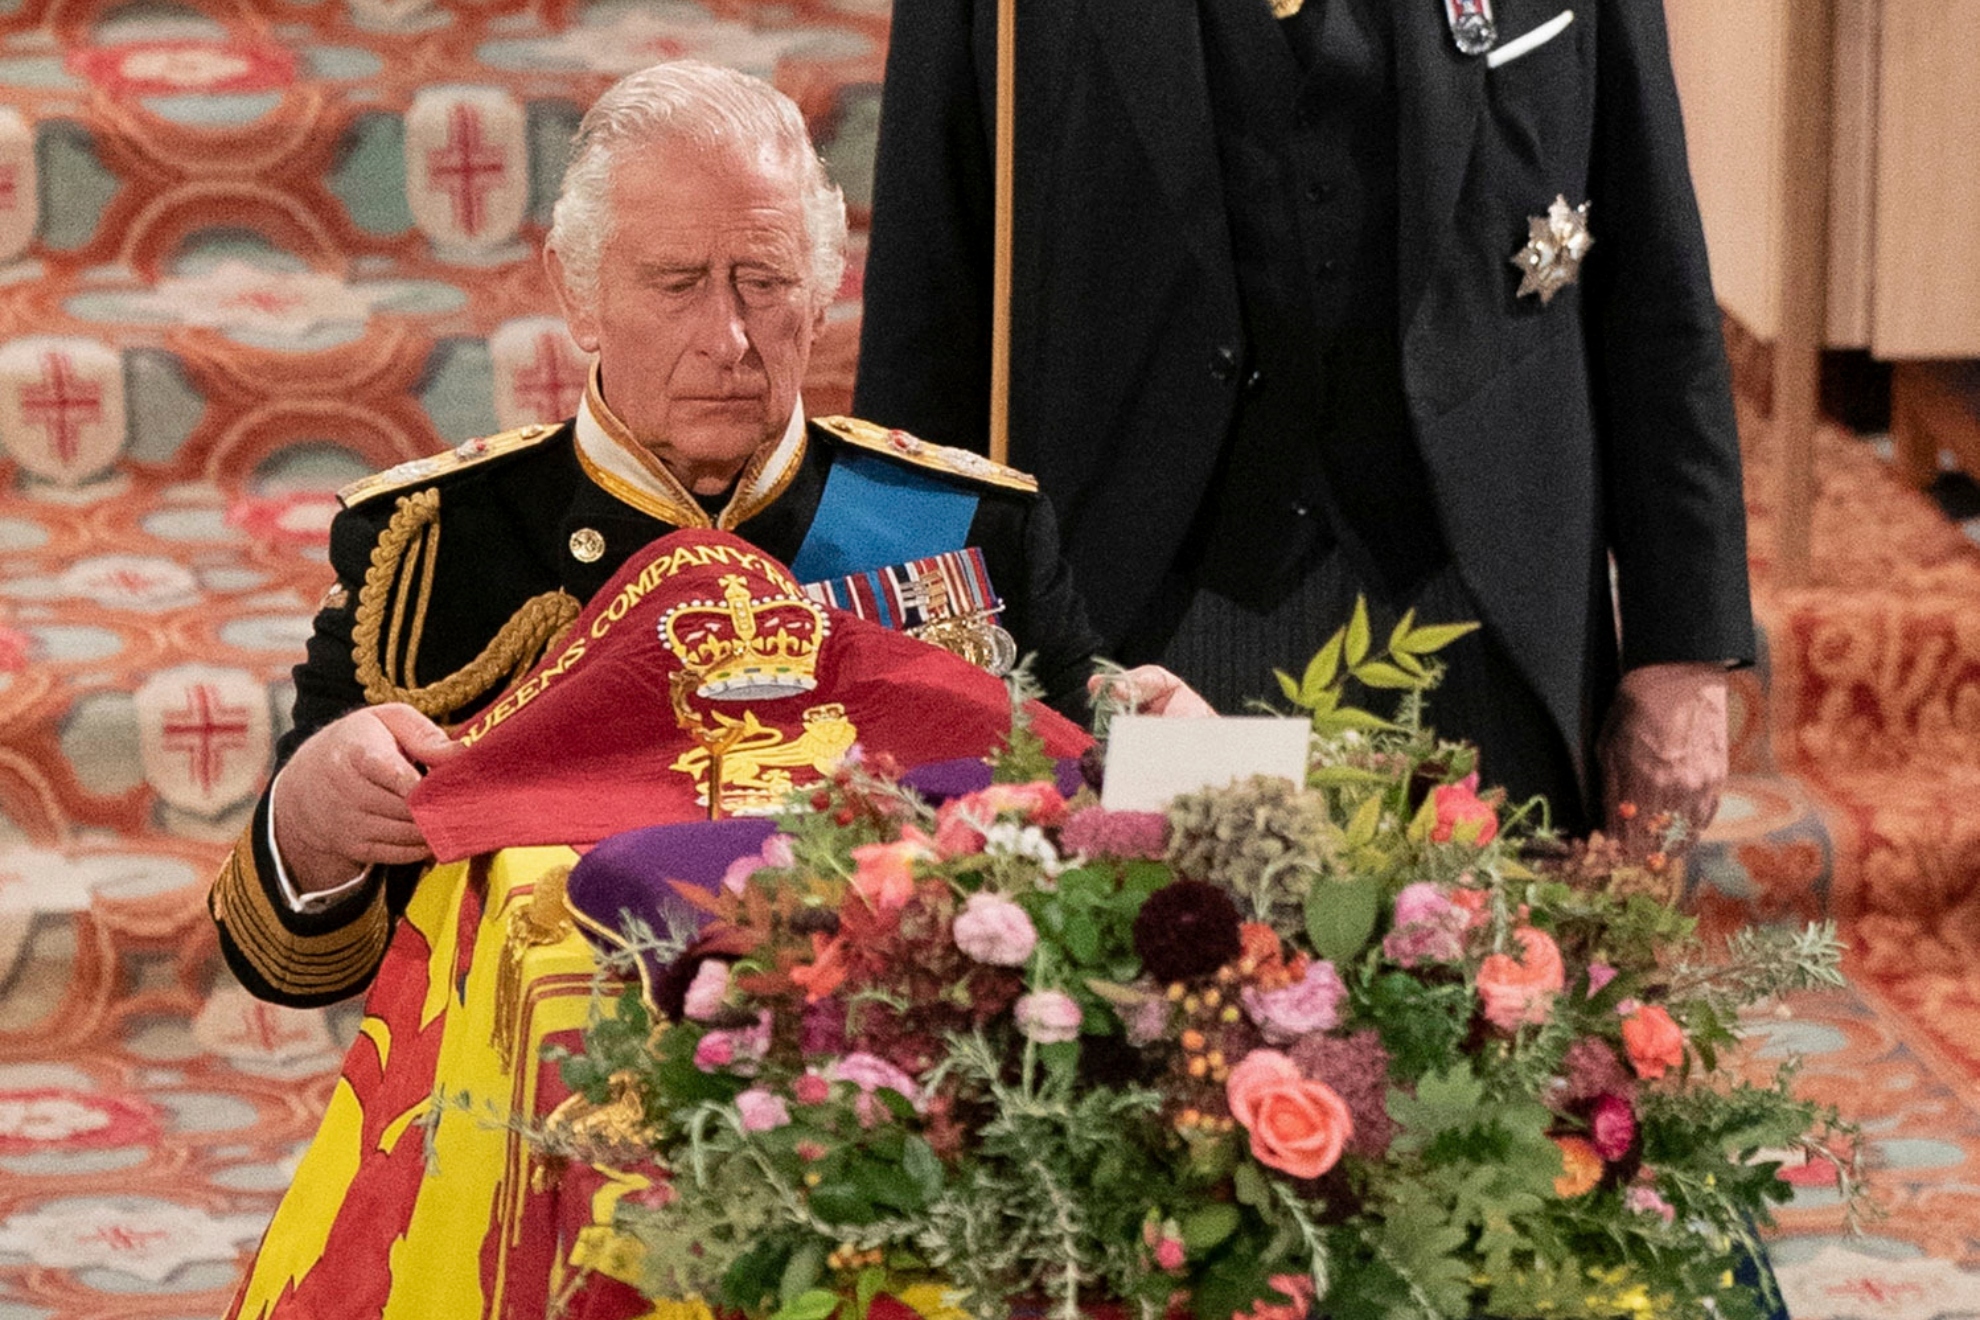 King Charles III places the Queen's Company Camp Colour of the Grenadier Guards during a committal service for Britain's Queen Elizabeth II at St George's Chapel, Windsor Castle, in Windsor, England, Monday, Sept. 19, 2022 / AP